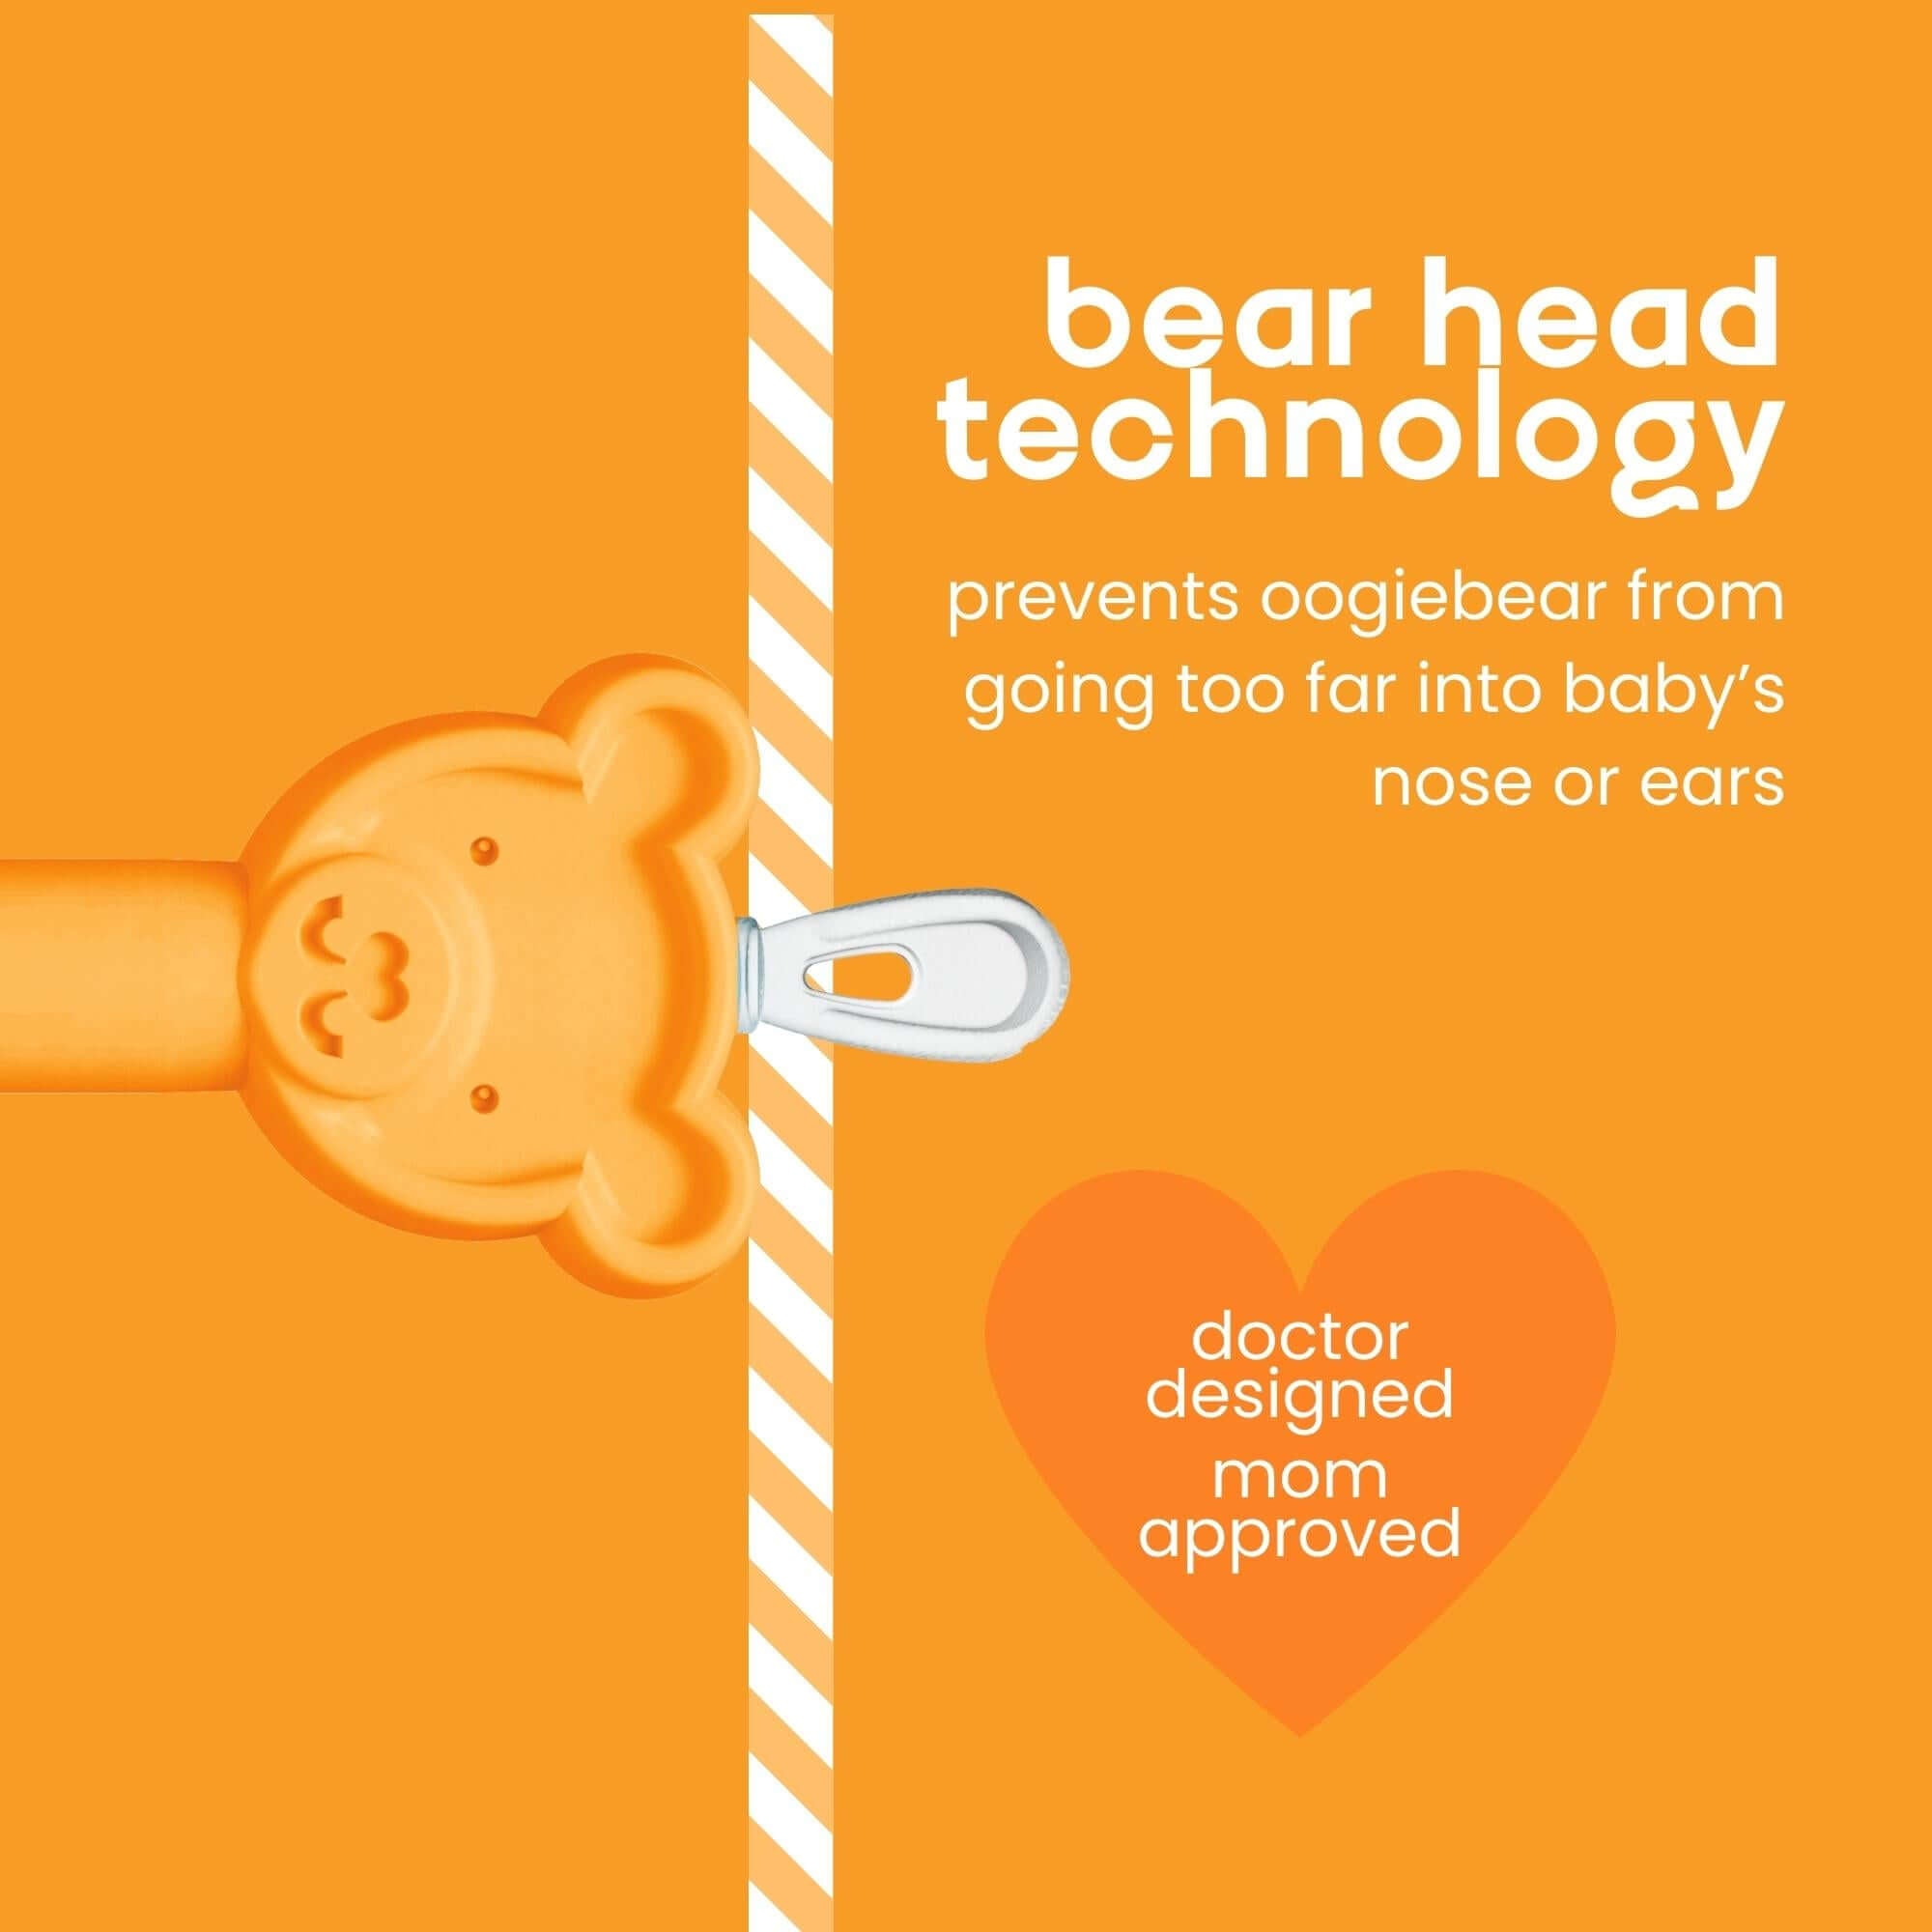 oogiebear bear head technology prevents it from going too far into baby's nose and ears